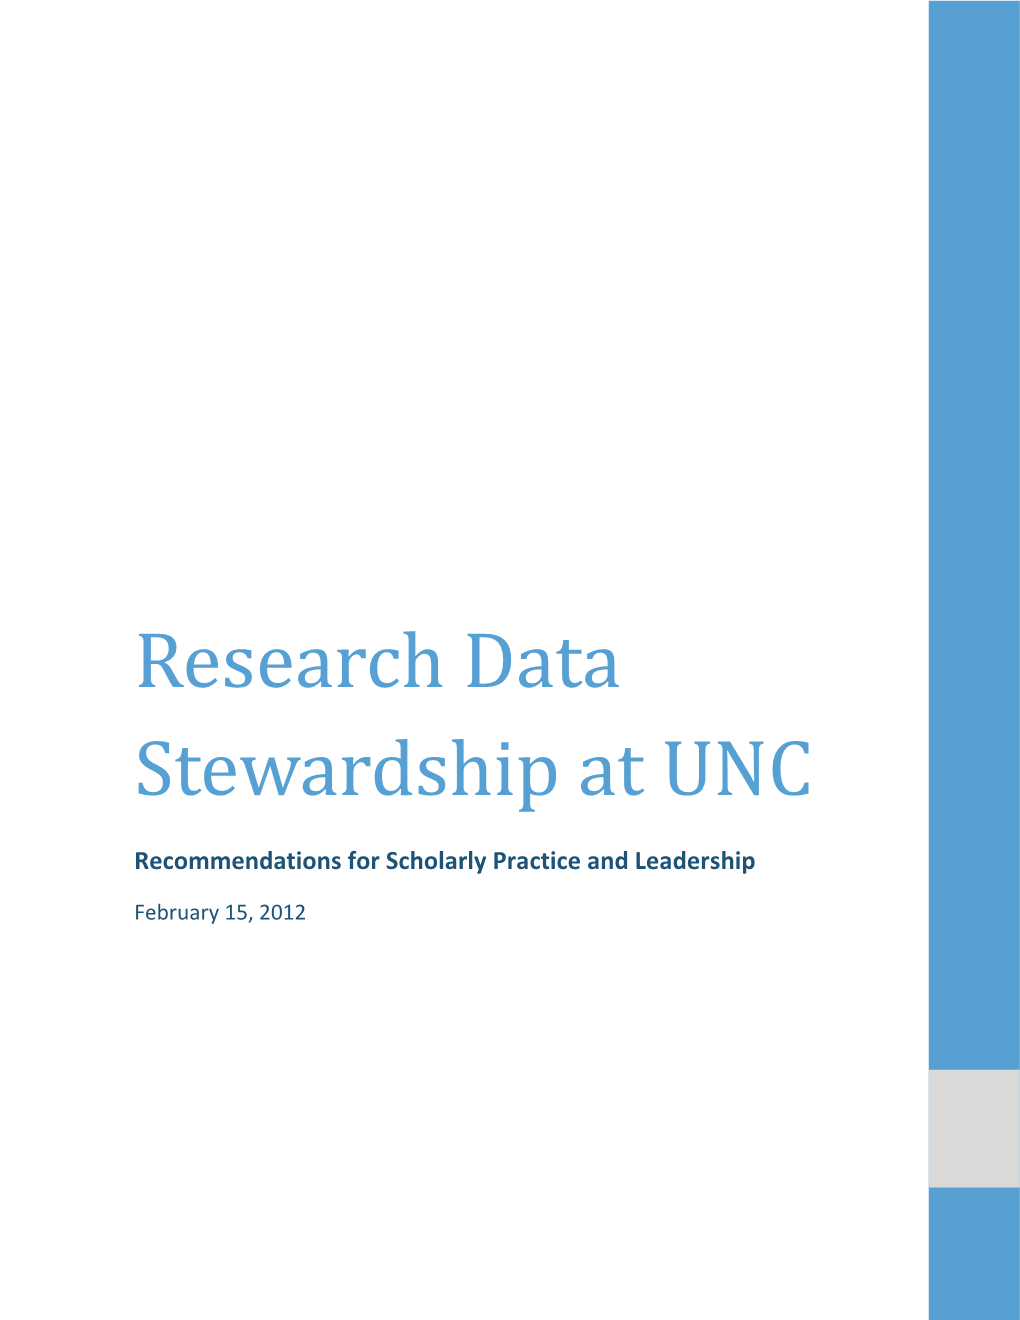 Research Data Stewardship at UNC